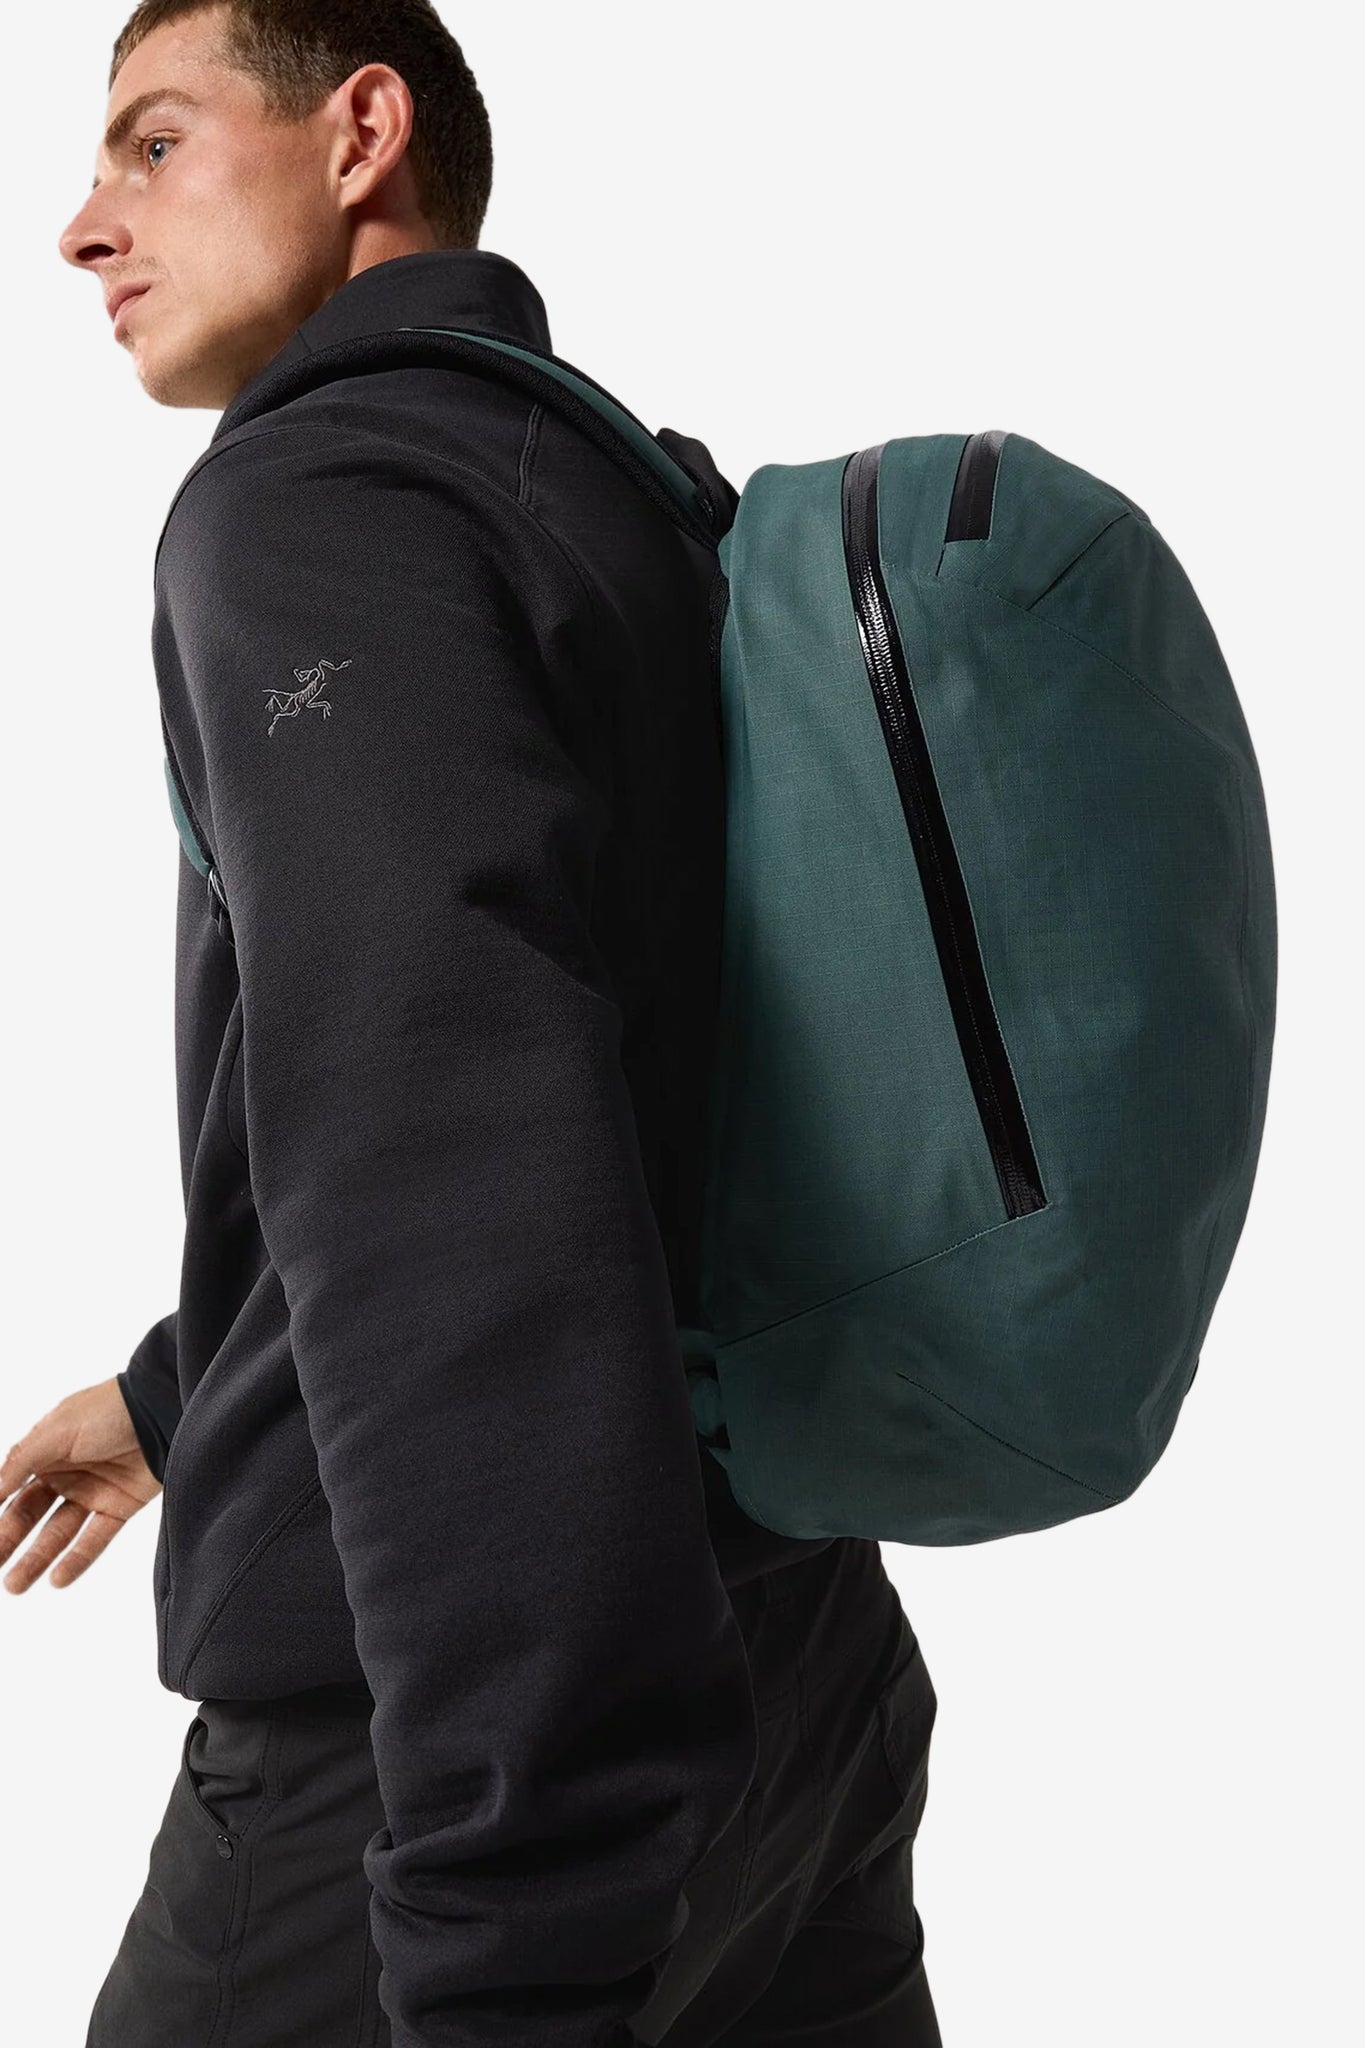 Arc'teryx Unisex Granville 16 Backpack in Boxcar